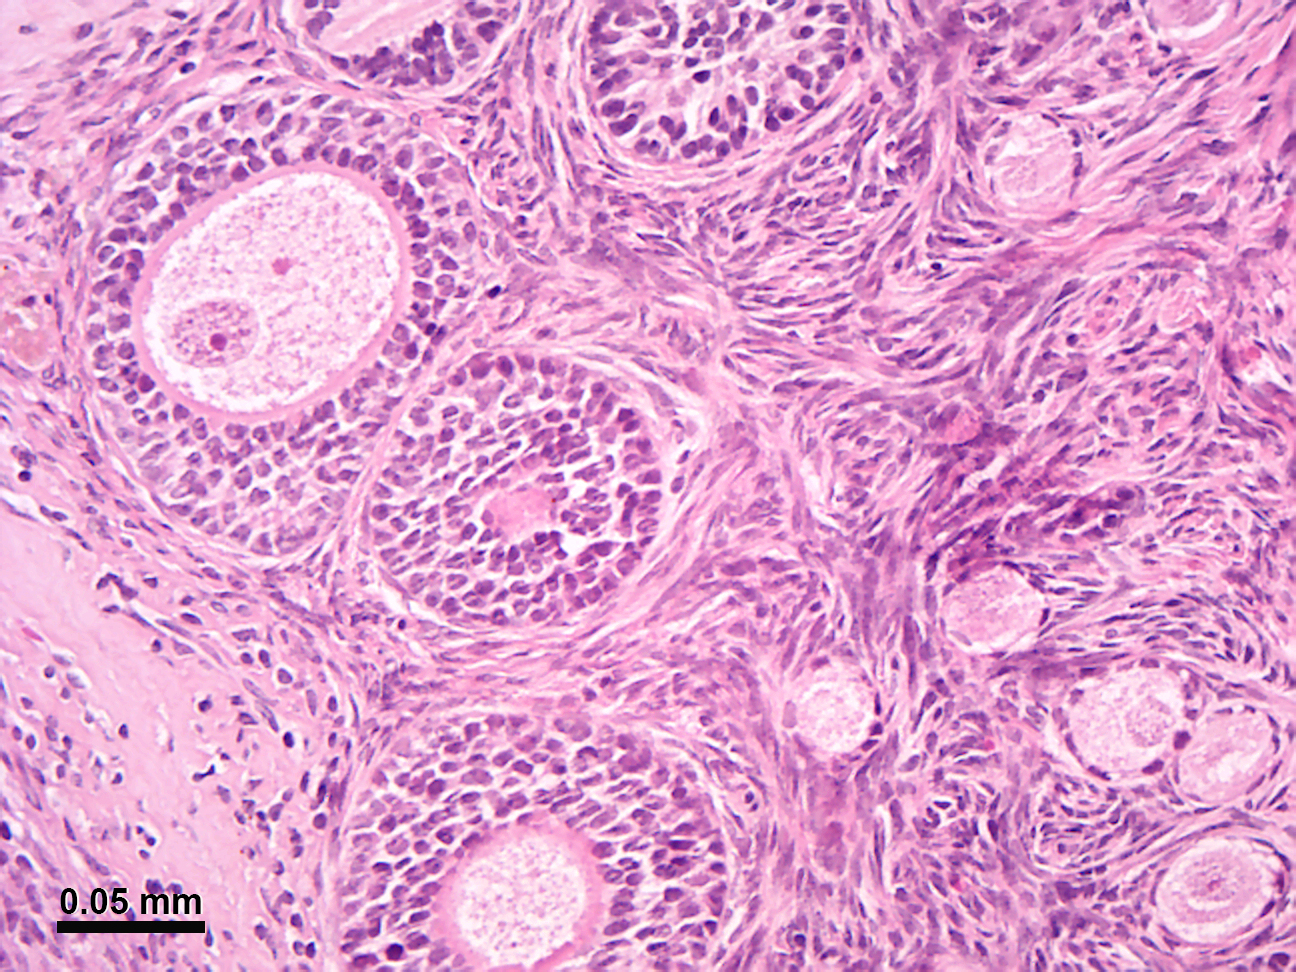 Micrograph of the ovarian cortex from a rhesus monkey showing several round follicles embedded in a matrix of stromal cells. A secondary follicle sectioned through the nucleus of an oocyte is at the upper left, and earlier stage follicles are at the lower right. The tissue was stained with the dyes hematoxylin and eosin.